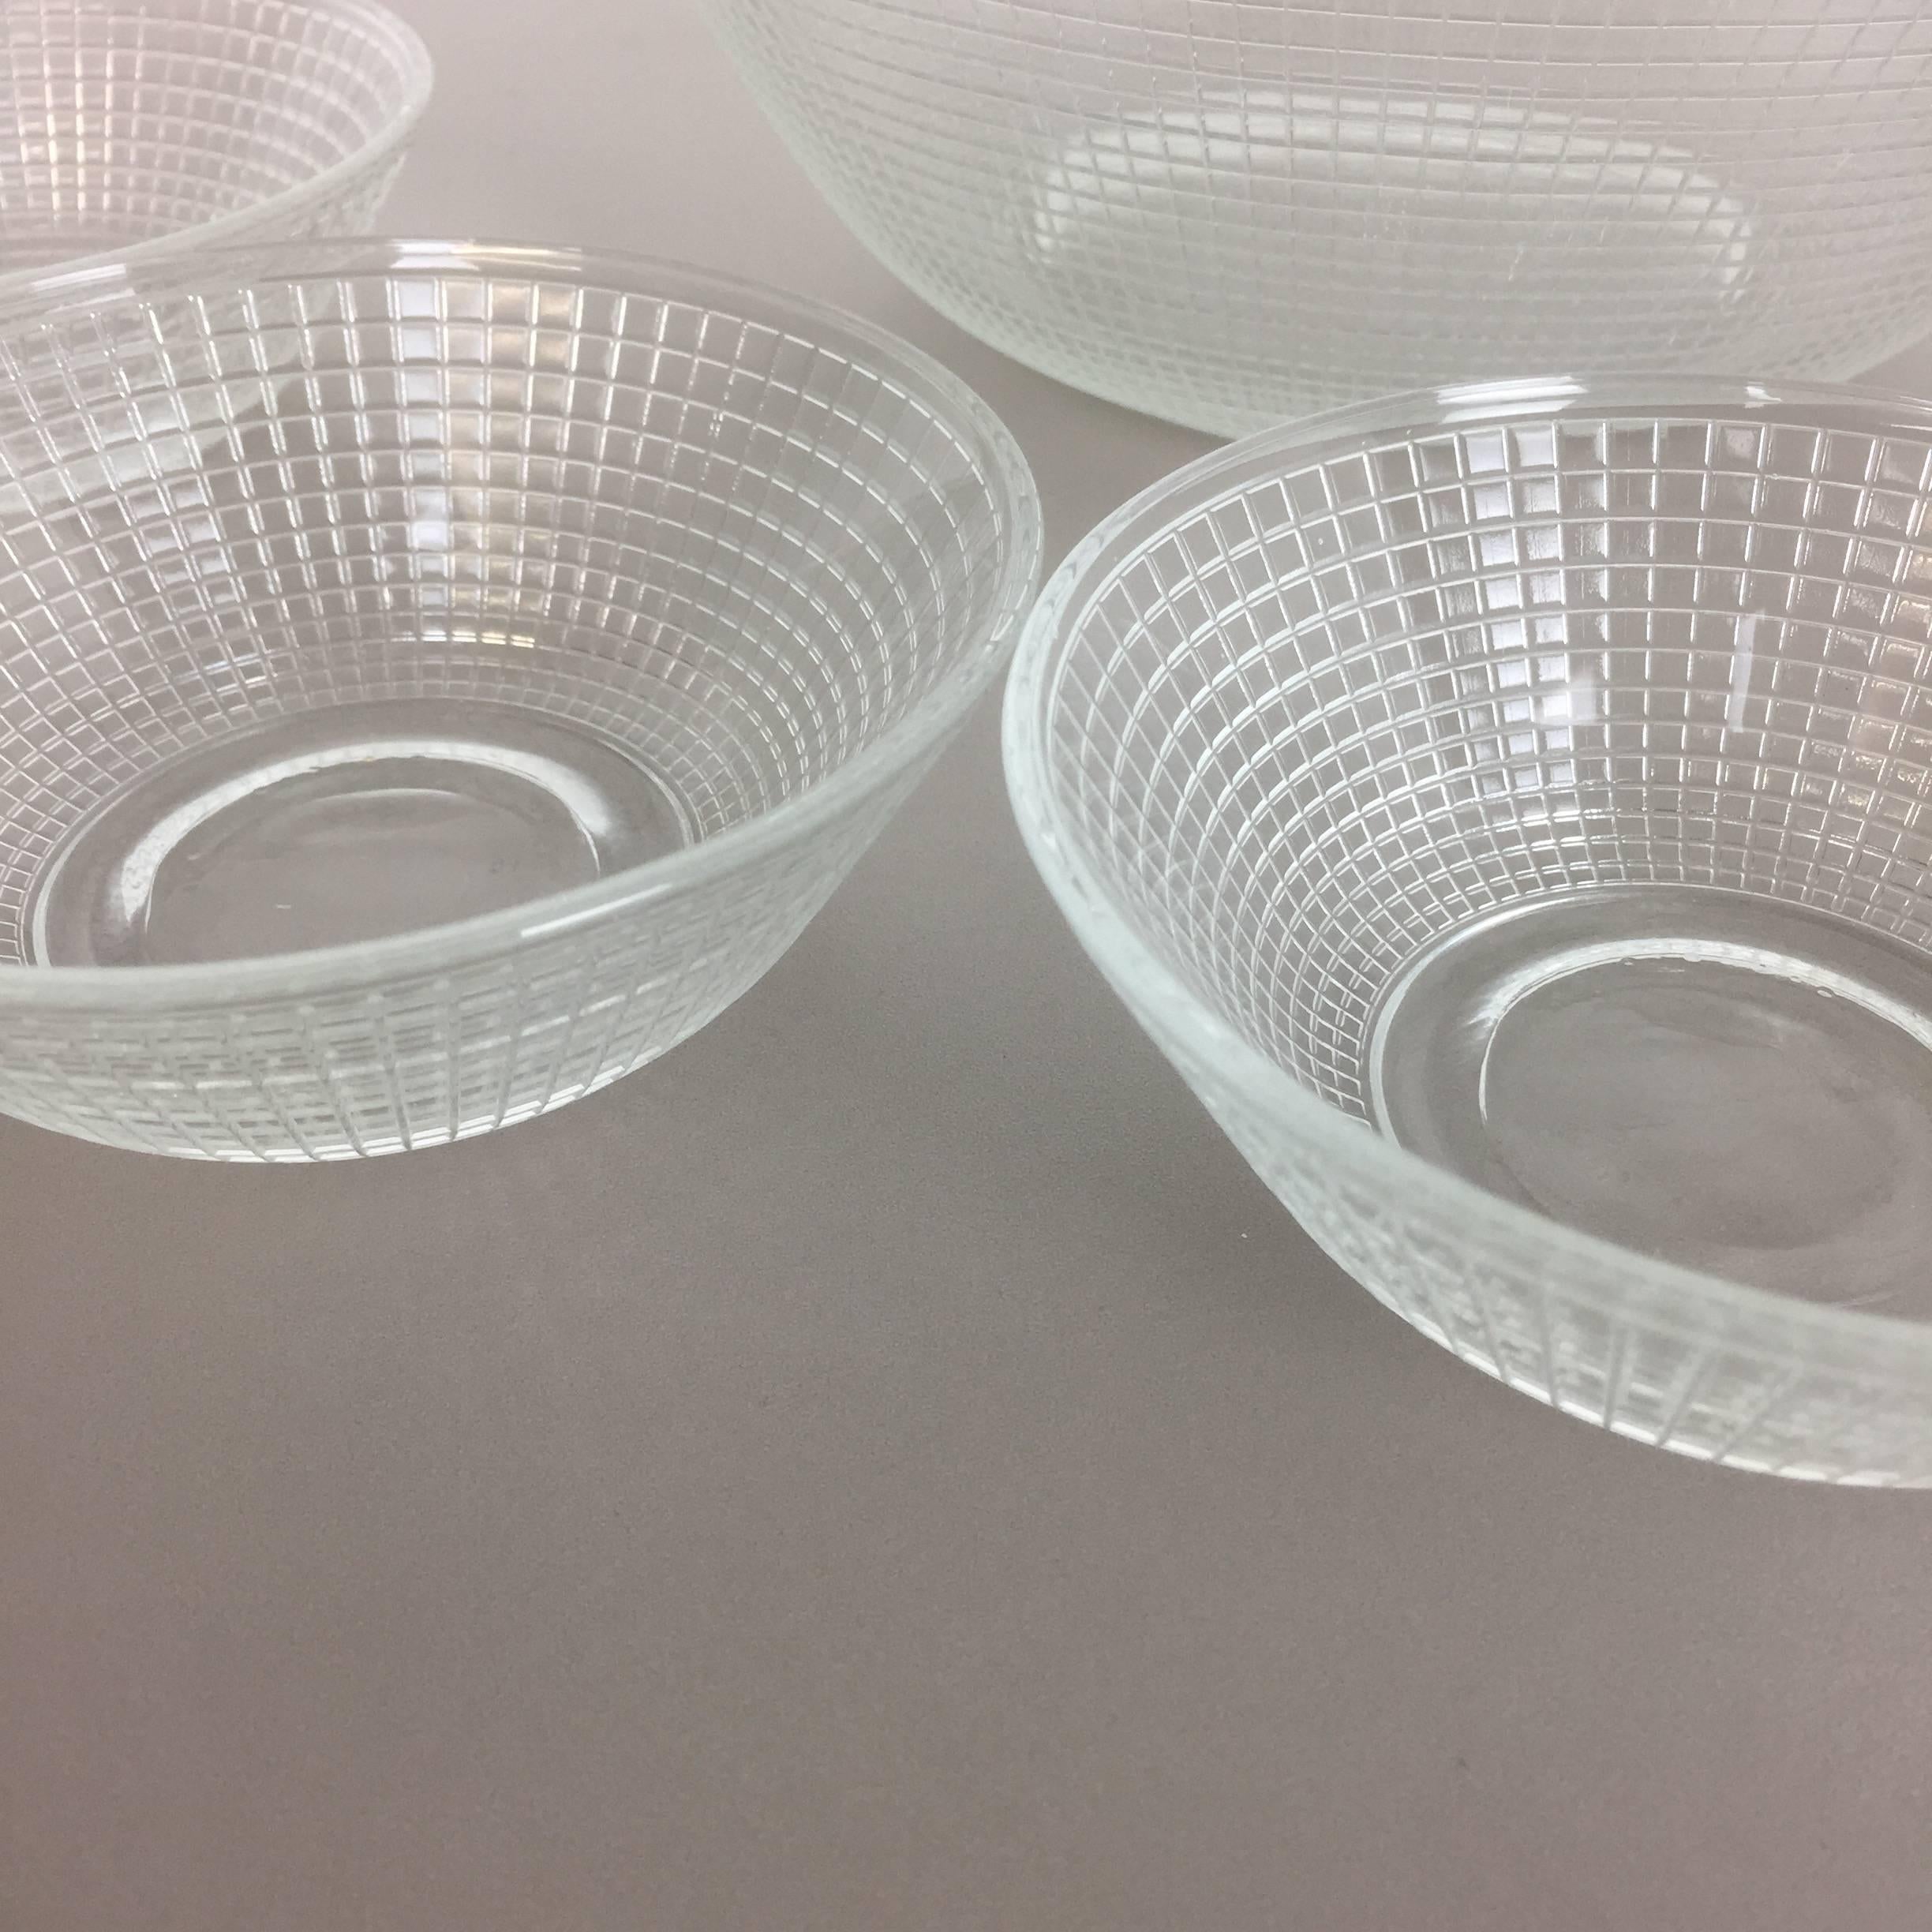 Bauhaus Set of 7 Glass Shells by Wilhelm Wagenfeld for Vlg Weisswasser, Germany, 1960s For Sale